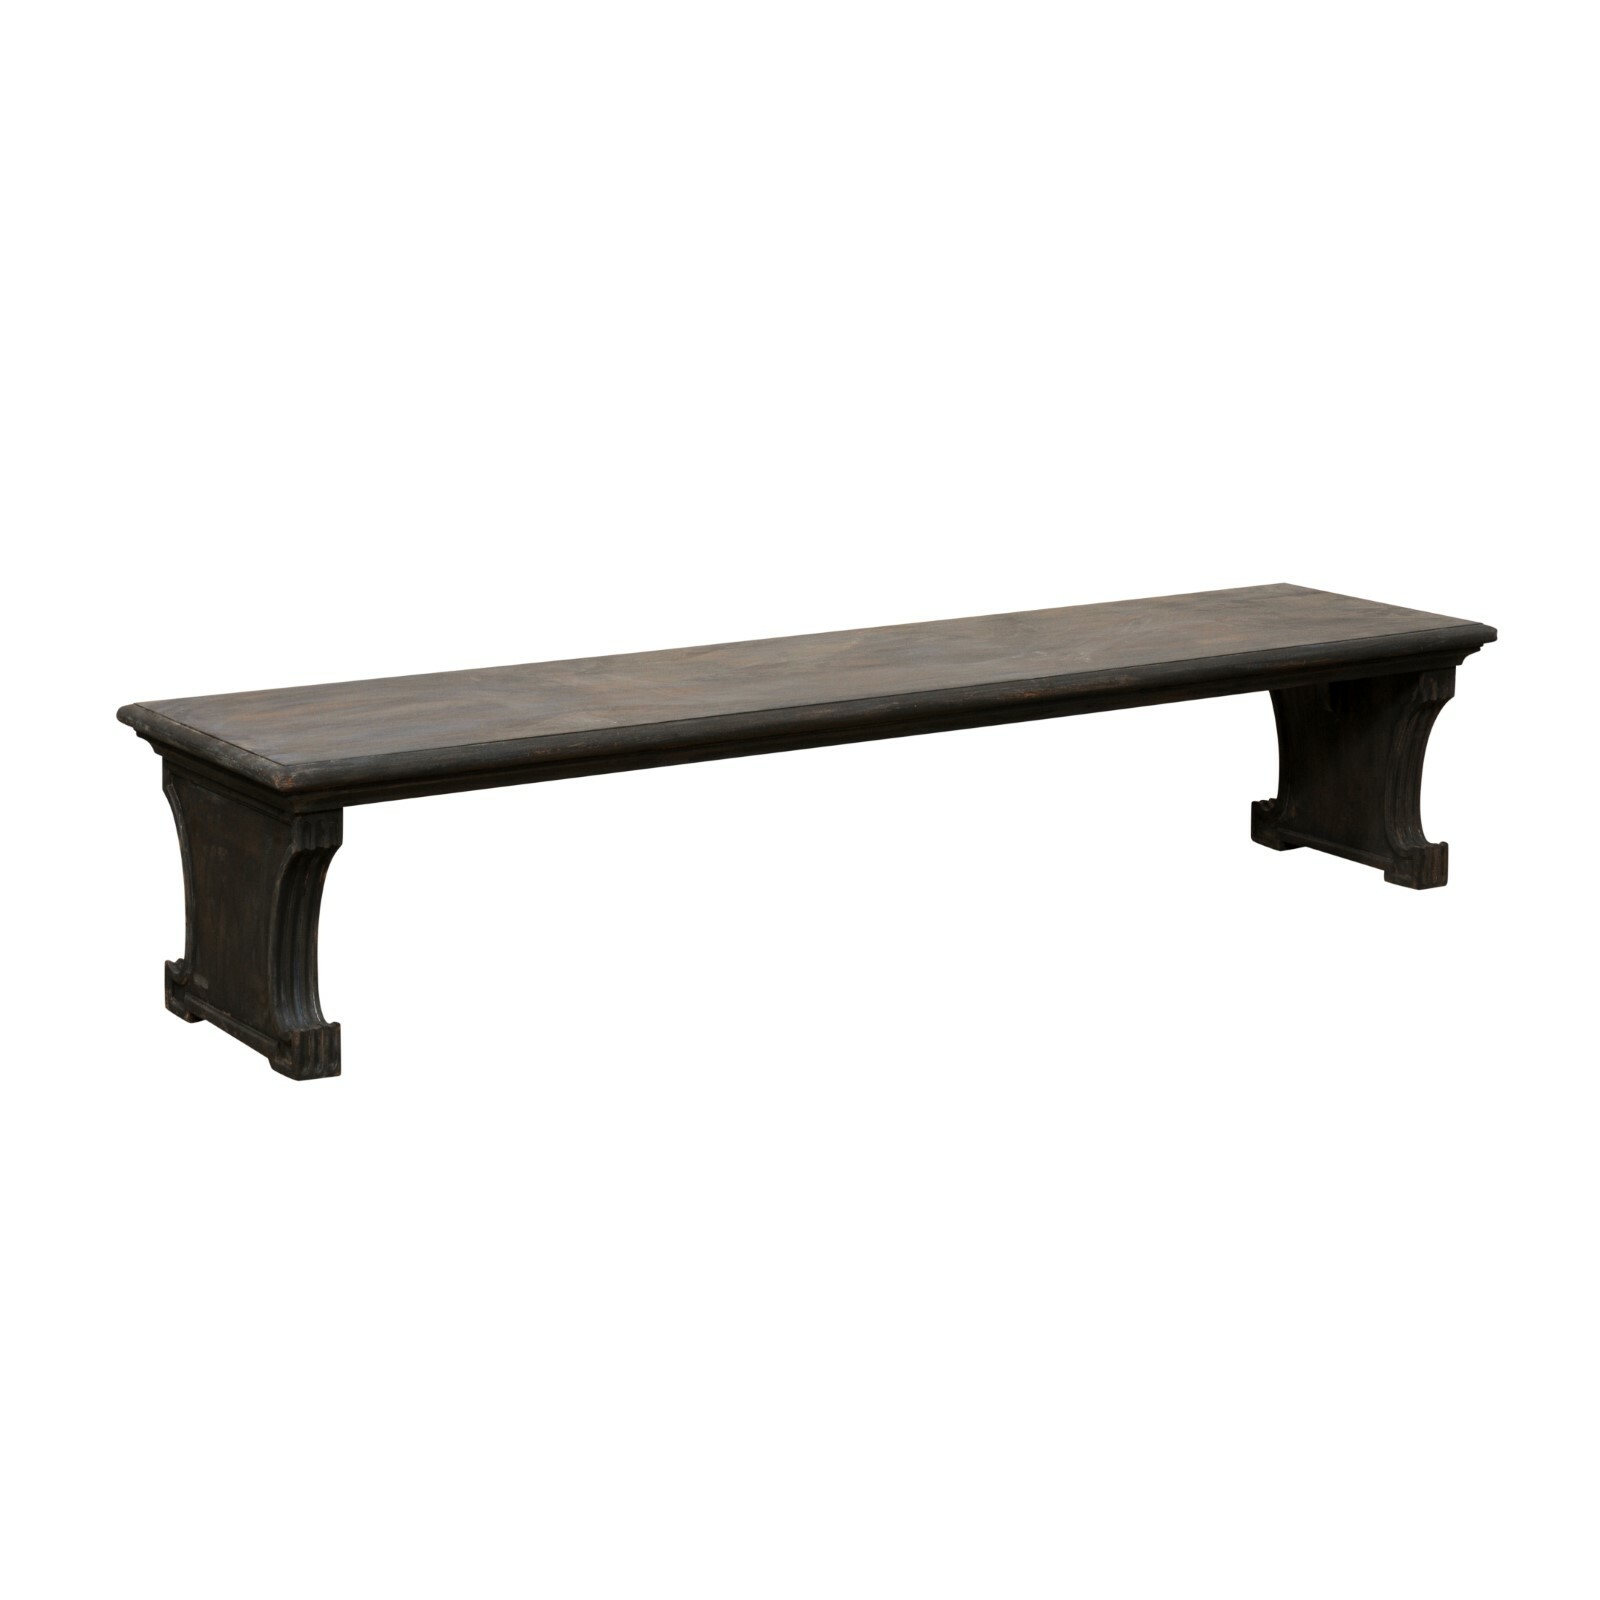 Antique English Wooden Bench, 7 Ft. Long